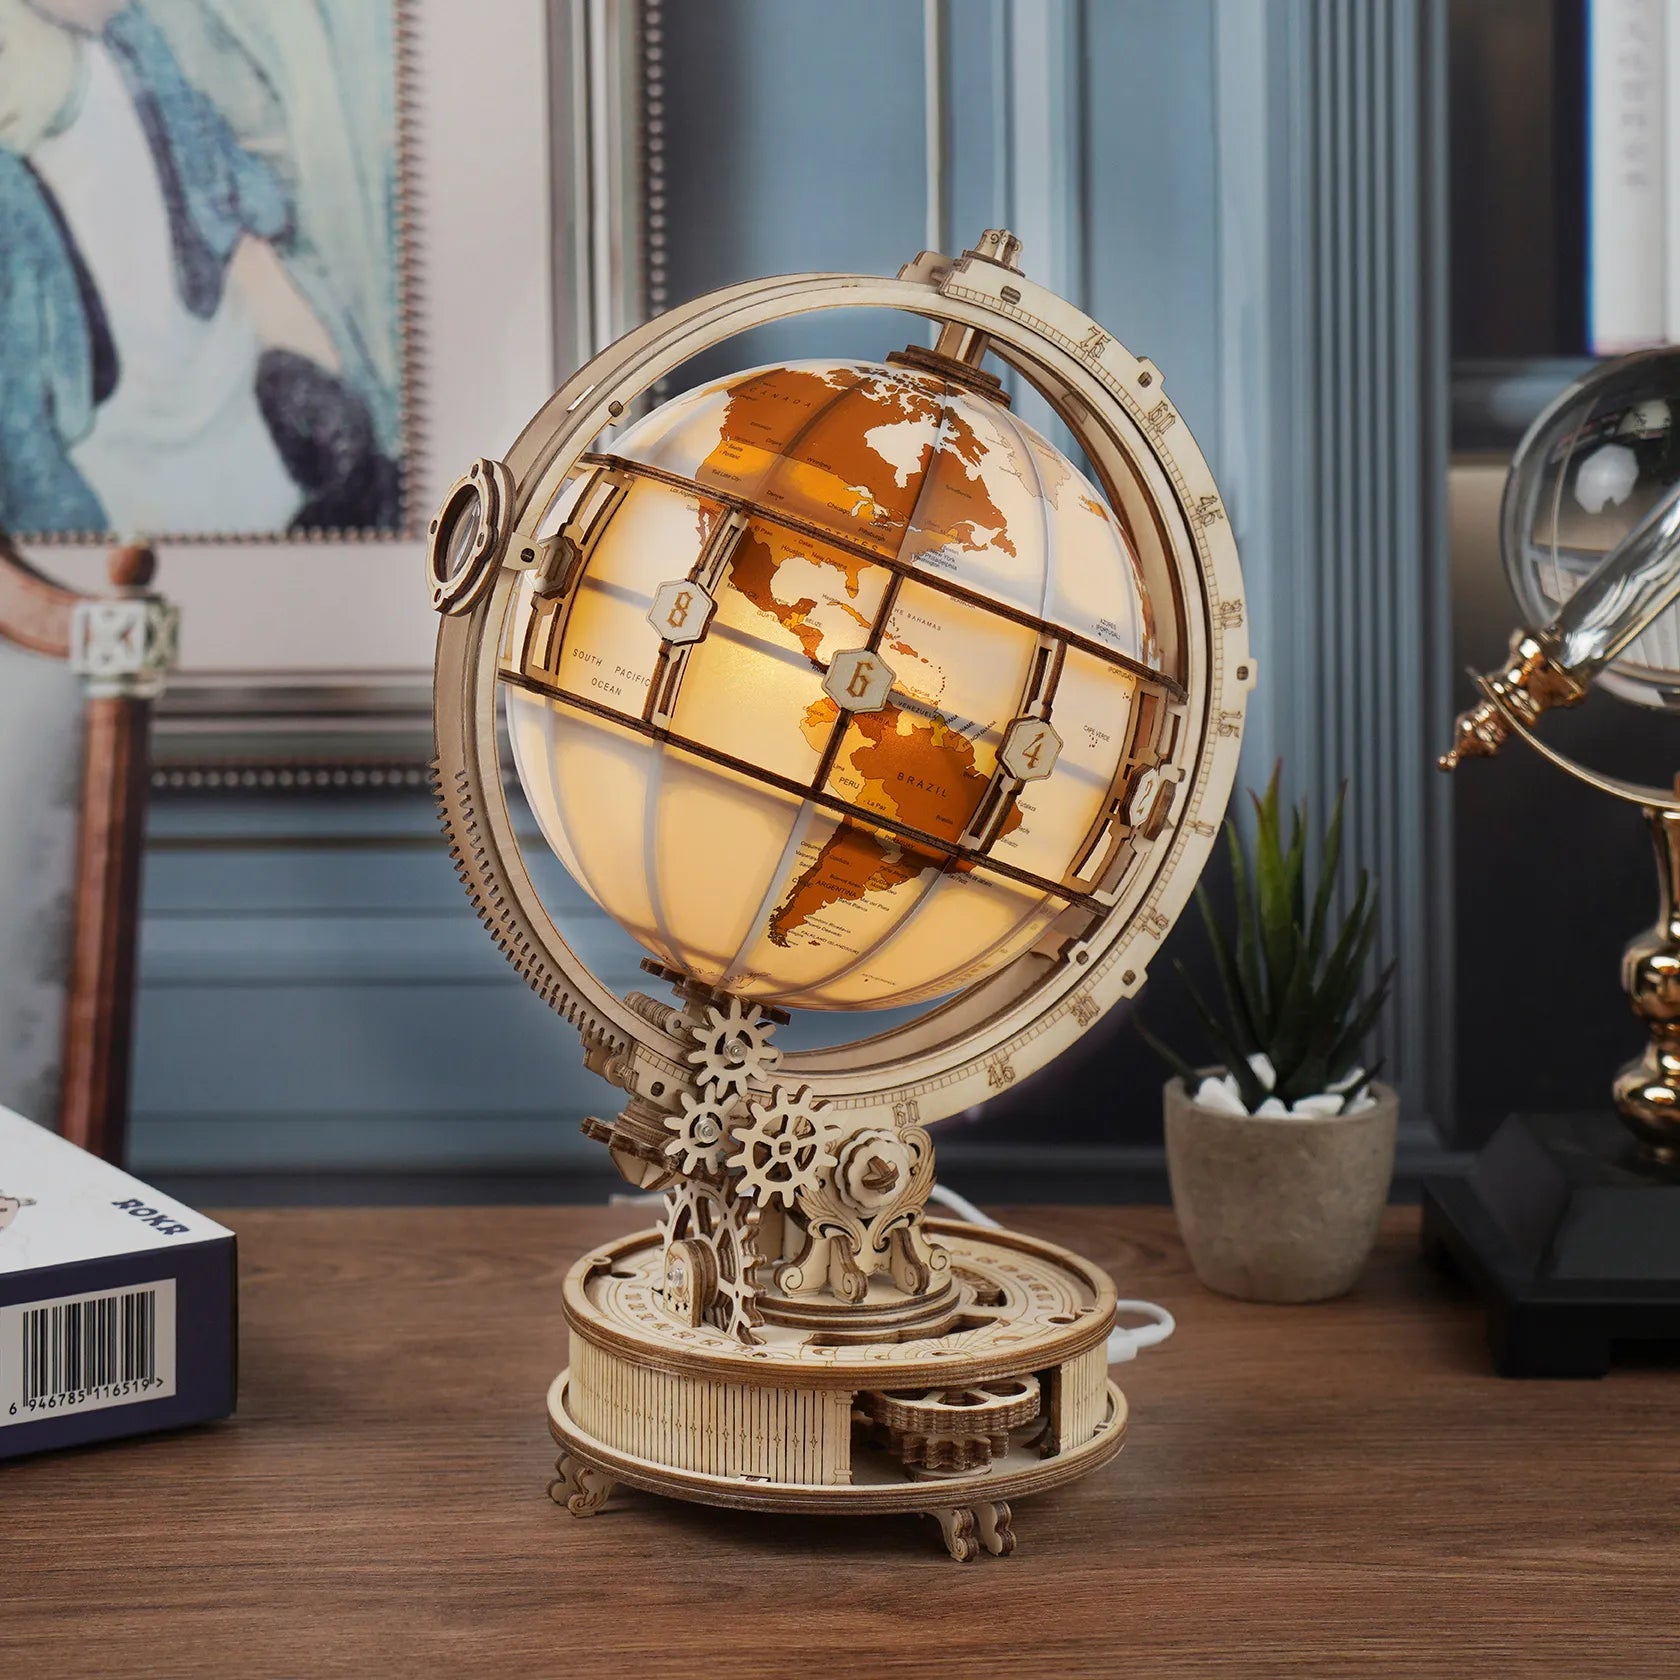 Wooden Globe Lamp Puzzle